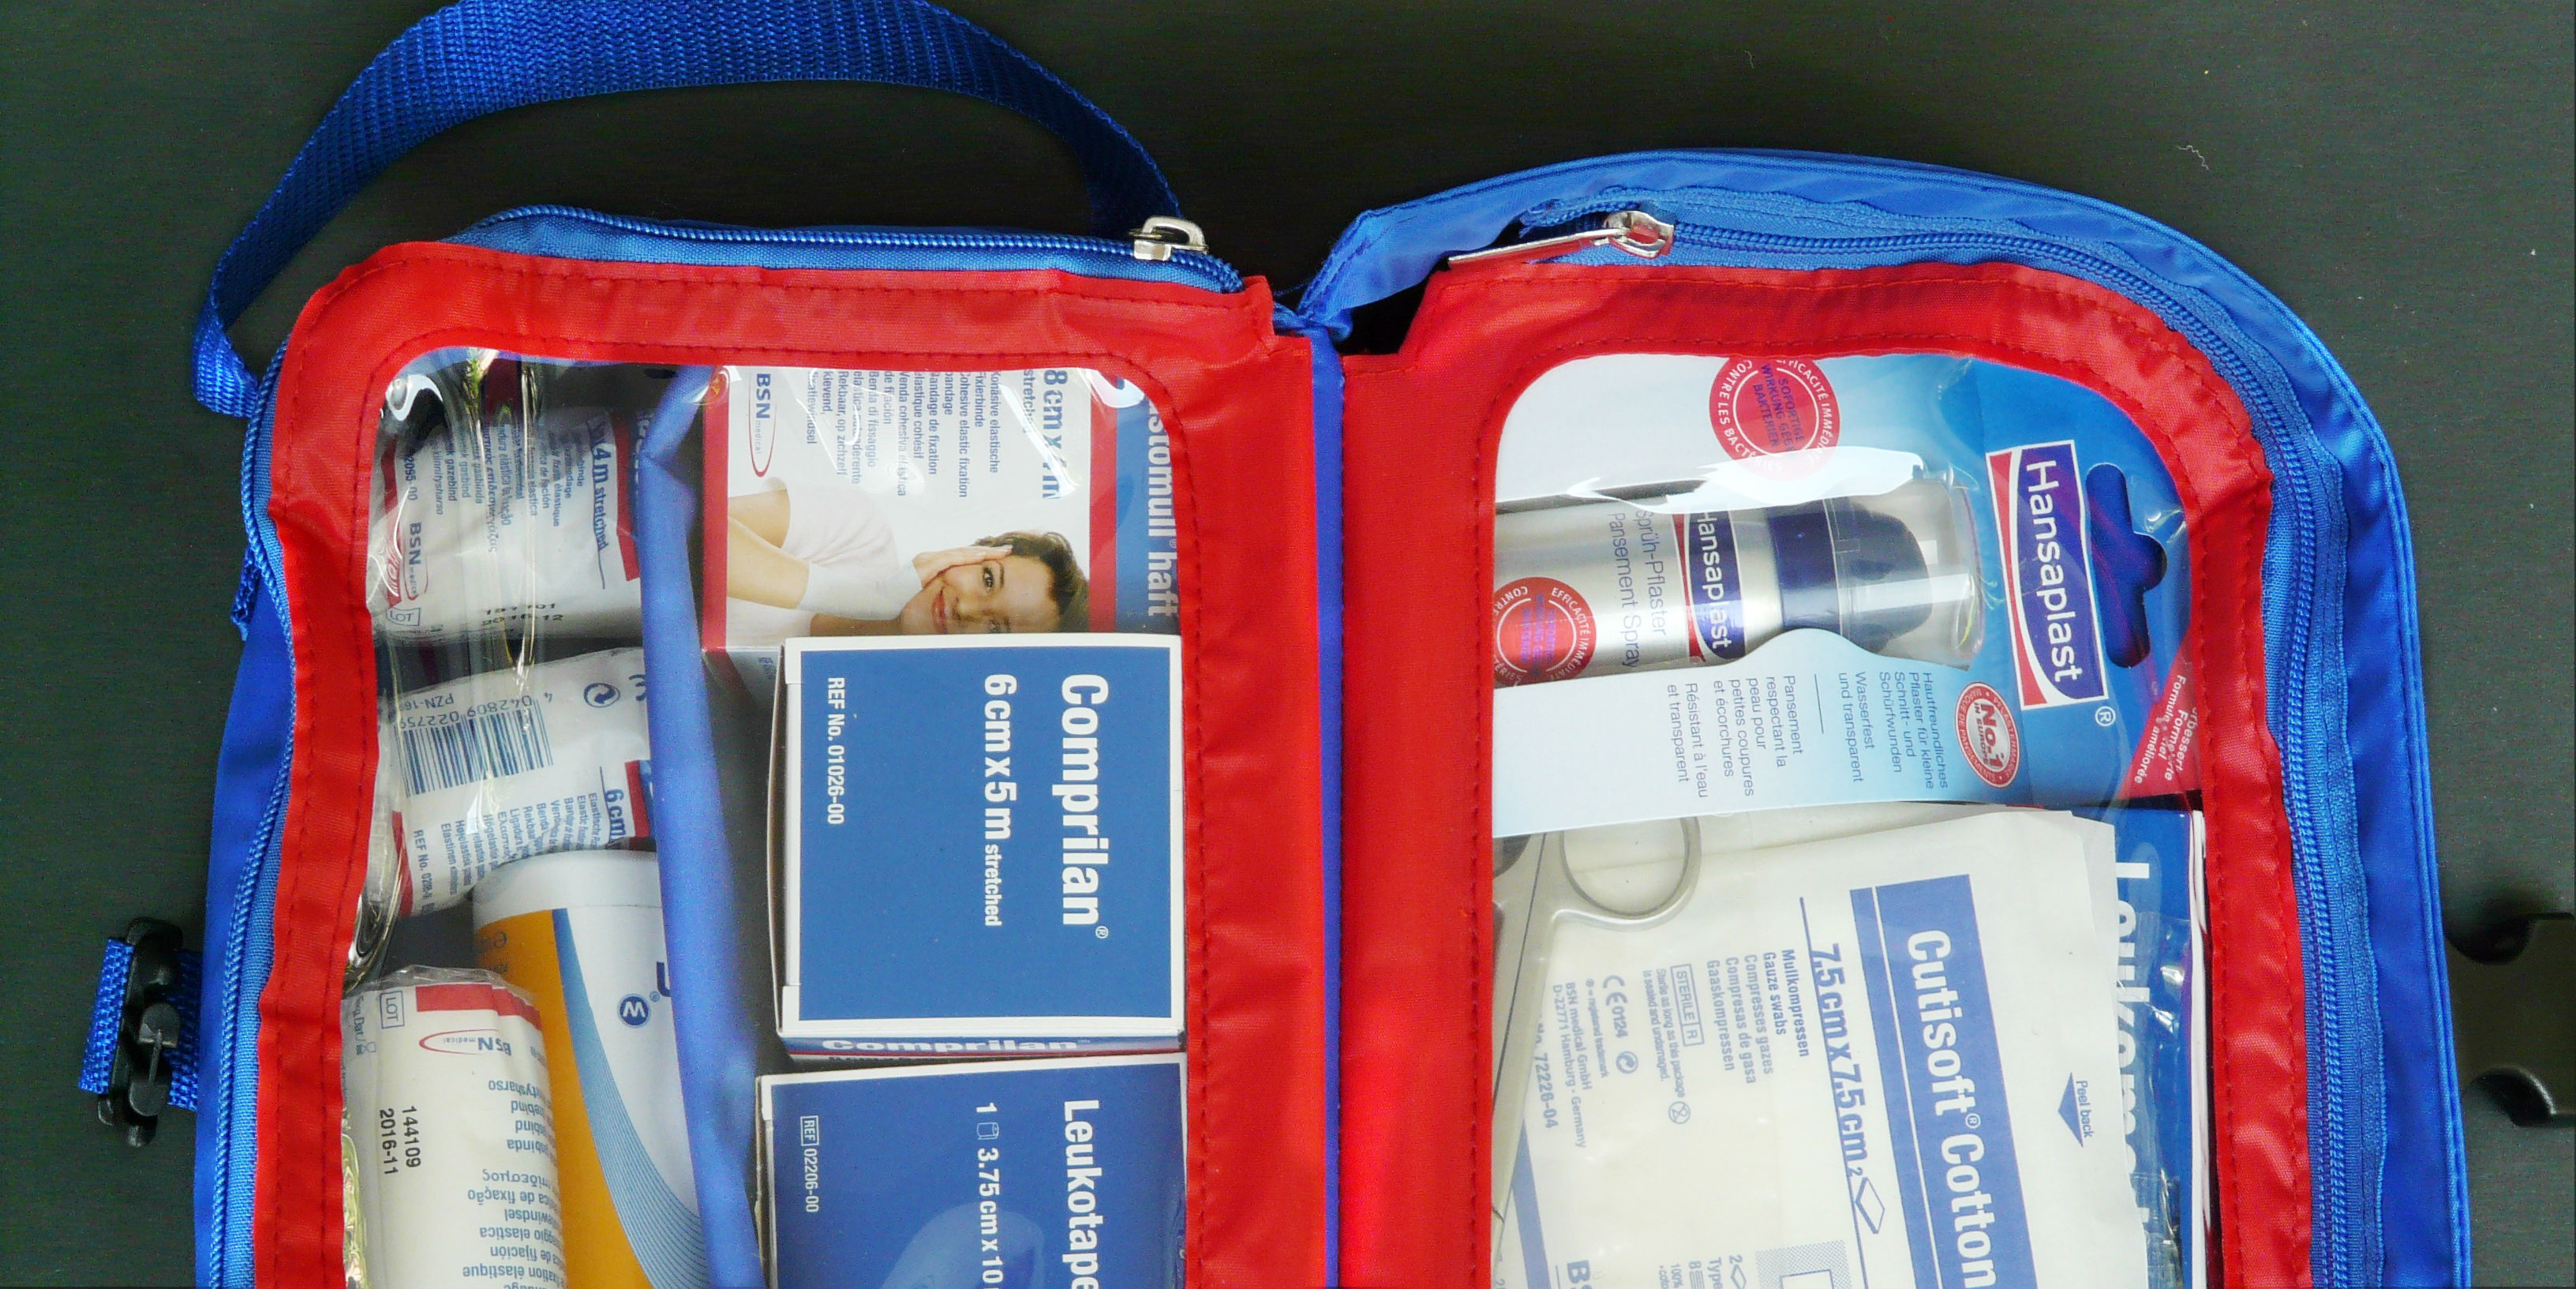 A first aid kit is an essential item. Remember this when planning what to pack for a school trip abroad.